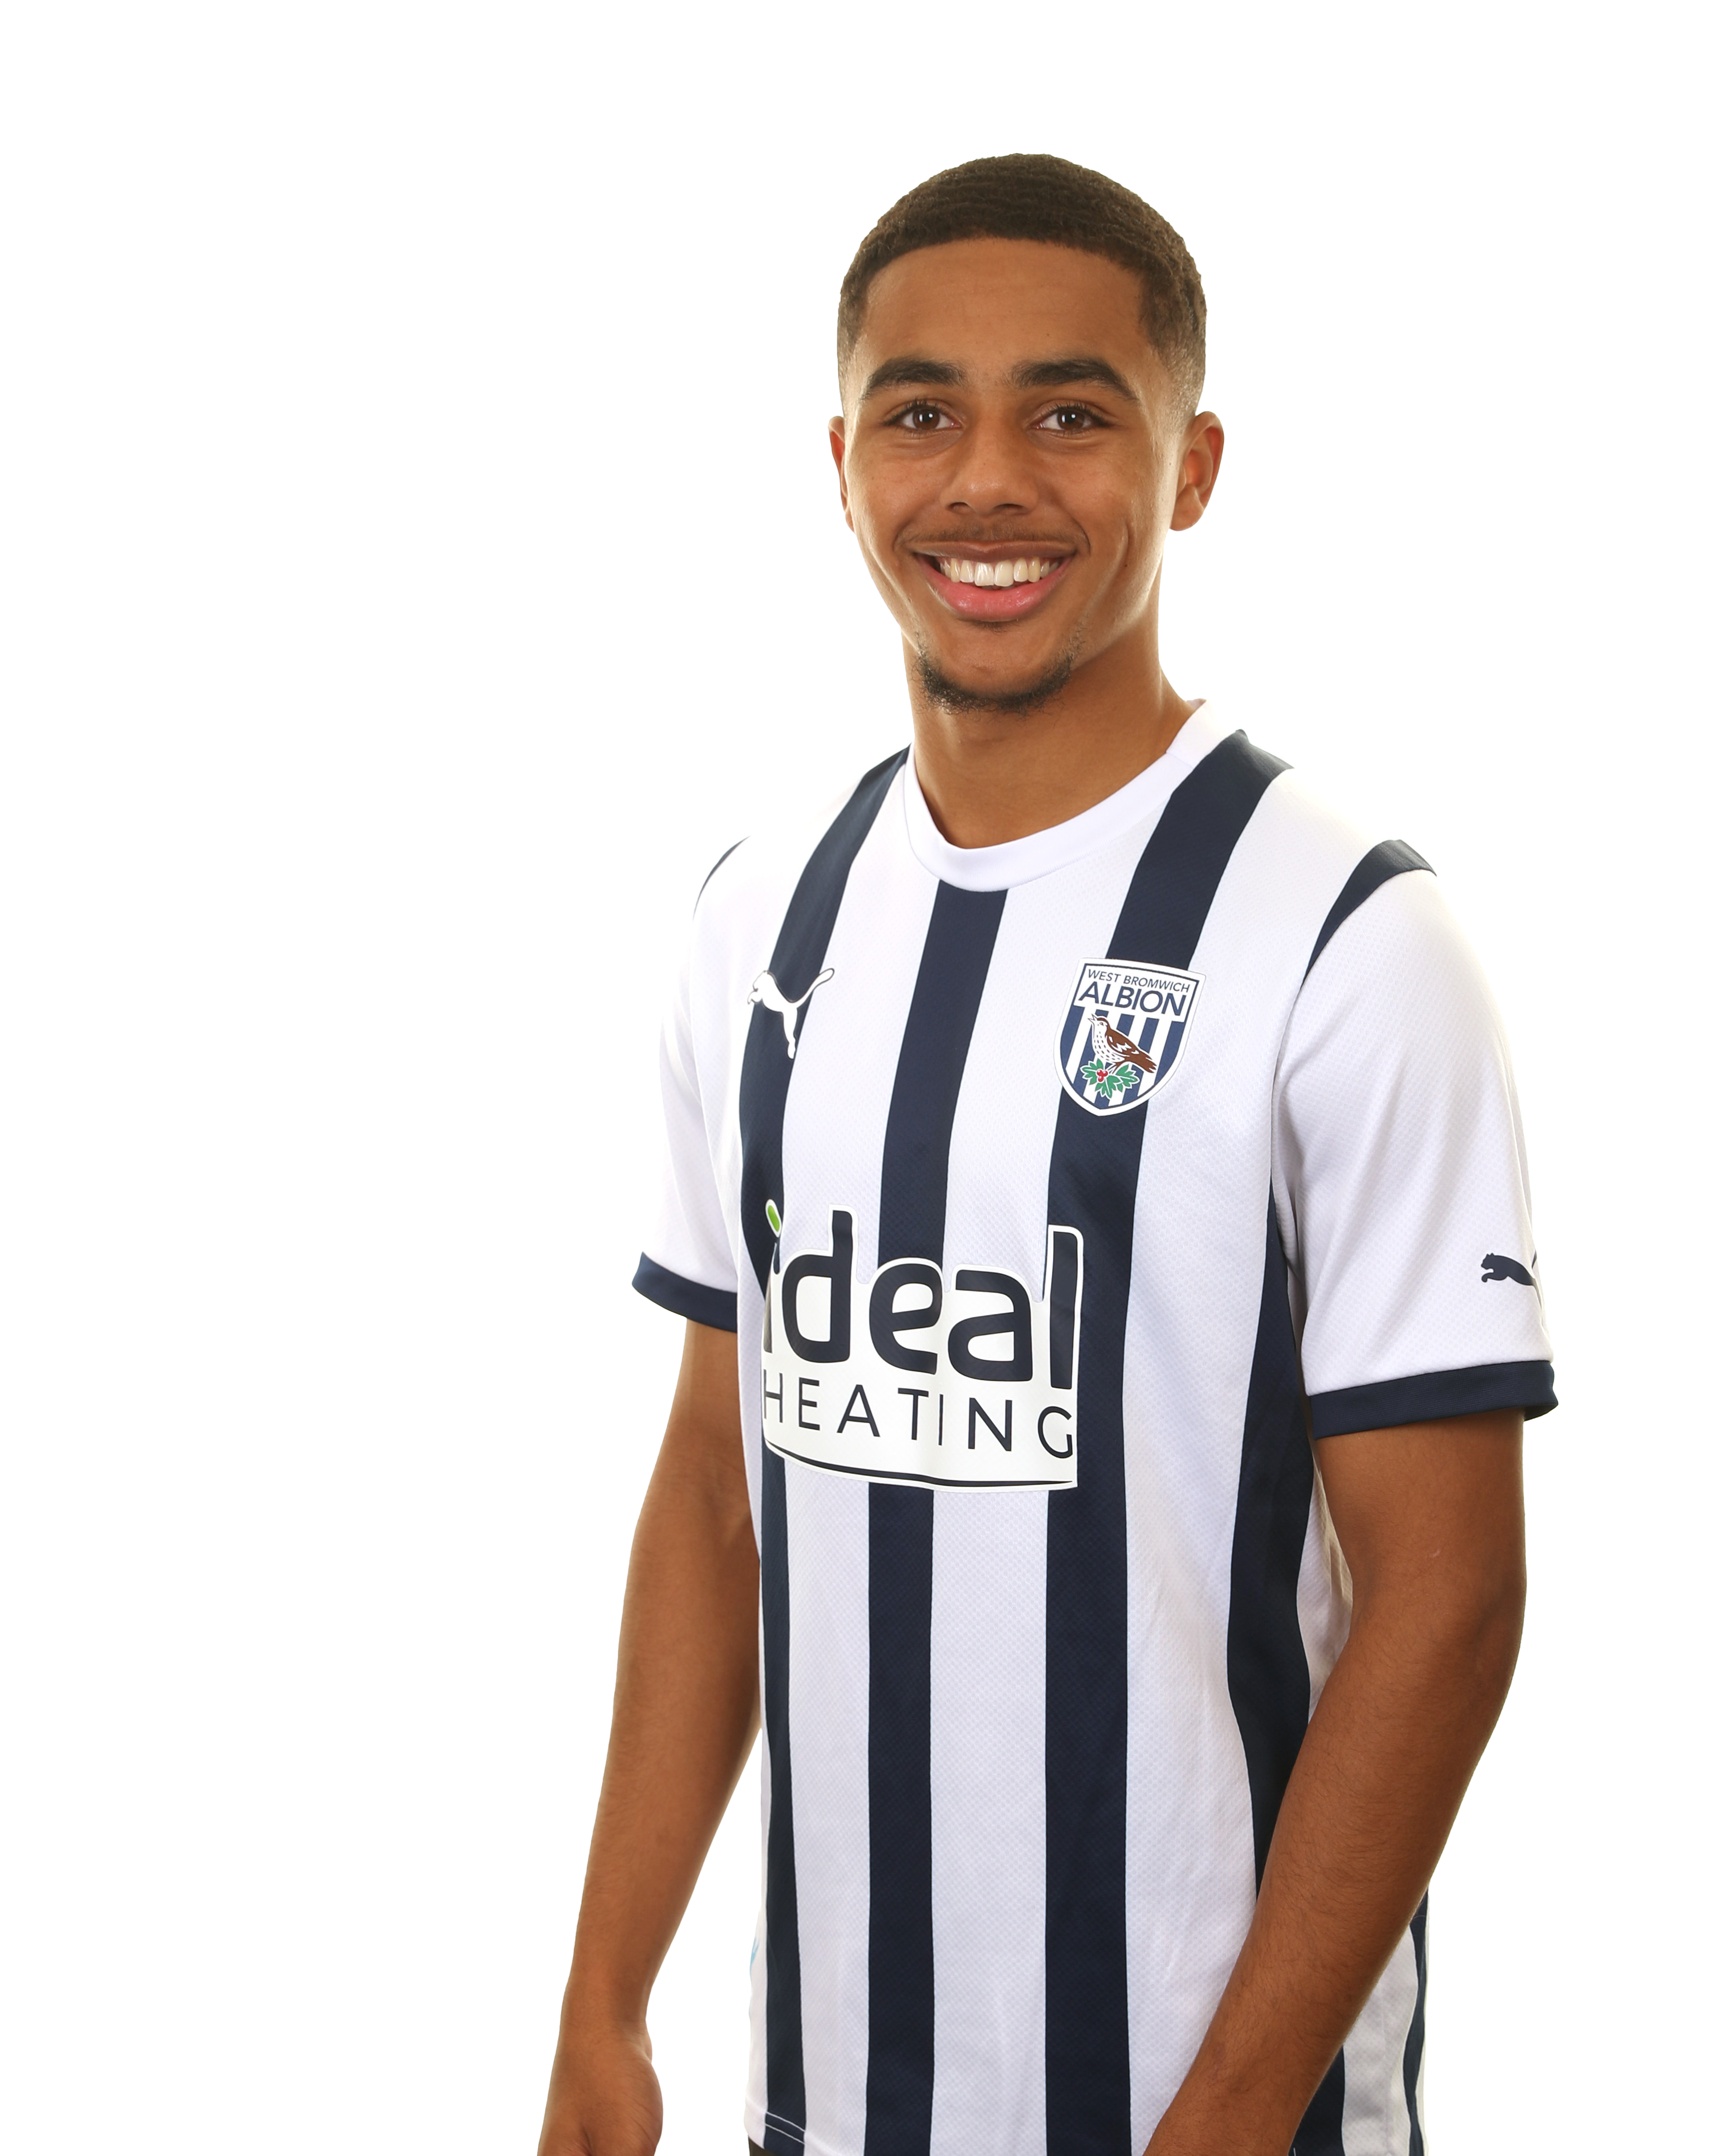 A photo headshot of Albion Under-18s player Deago Nelson ahead of the 2023/24 season